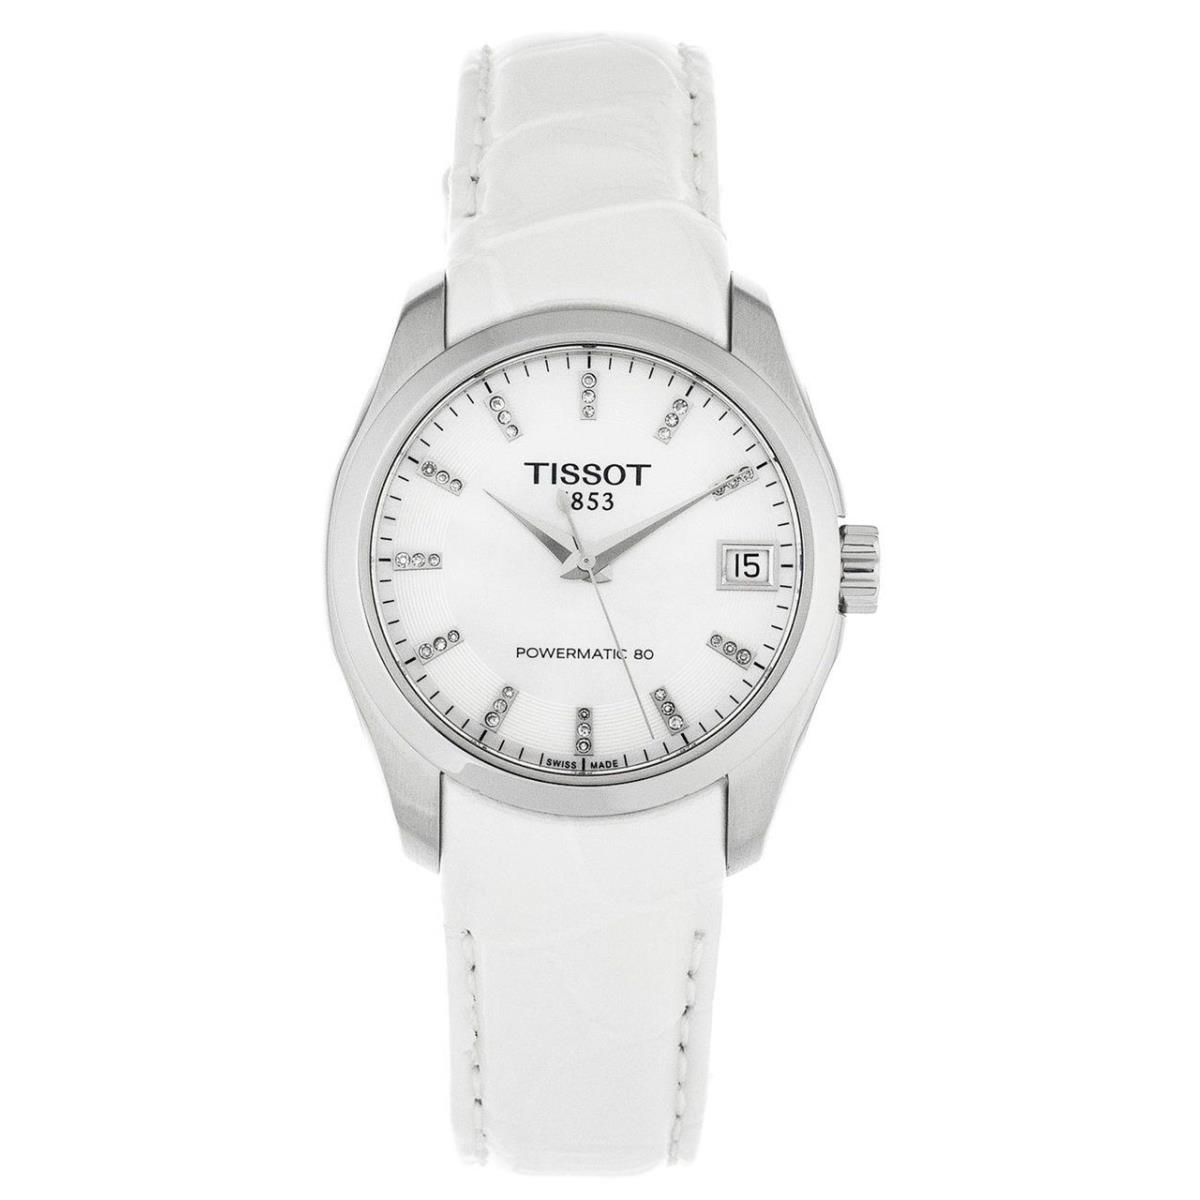 Tissot Couturier Powermatic 80 White Mop Dial Lthr Women Watch T0352071611600 - Mother of Pearl Dial, White Band, Silver Bezel